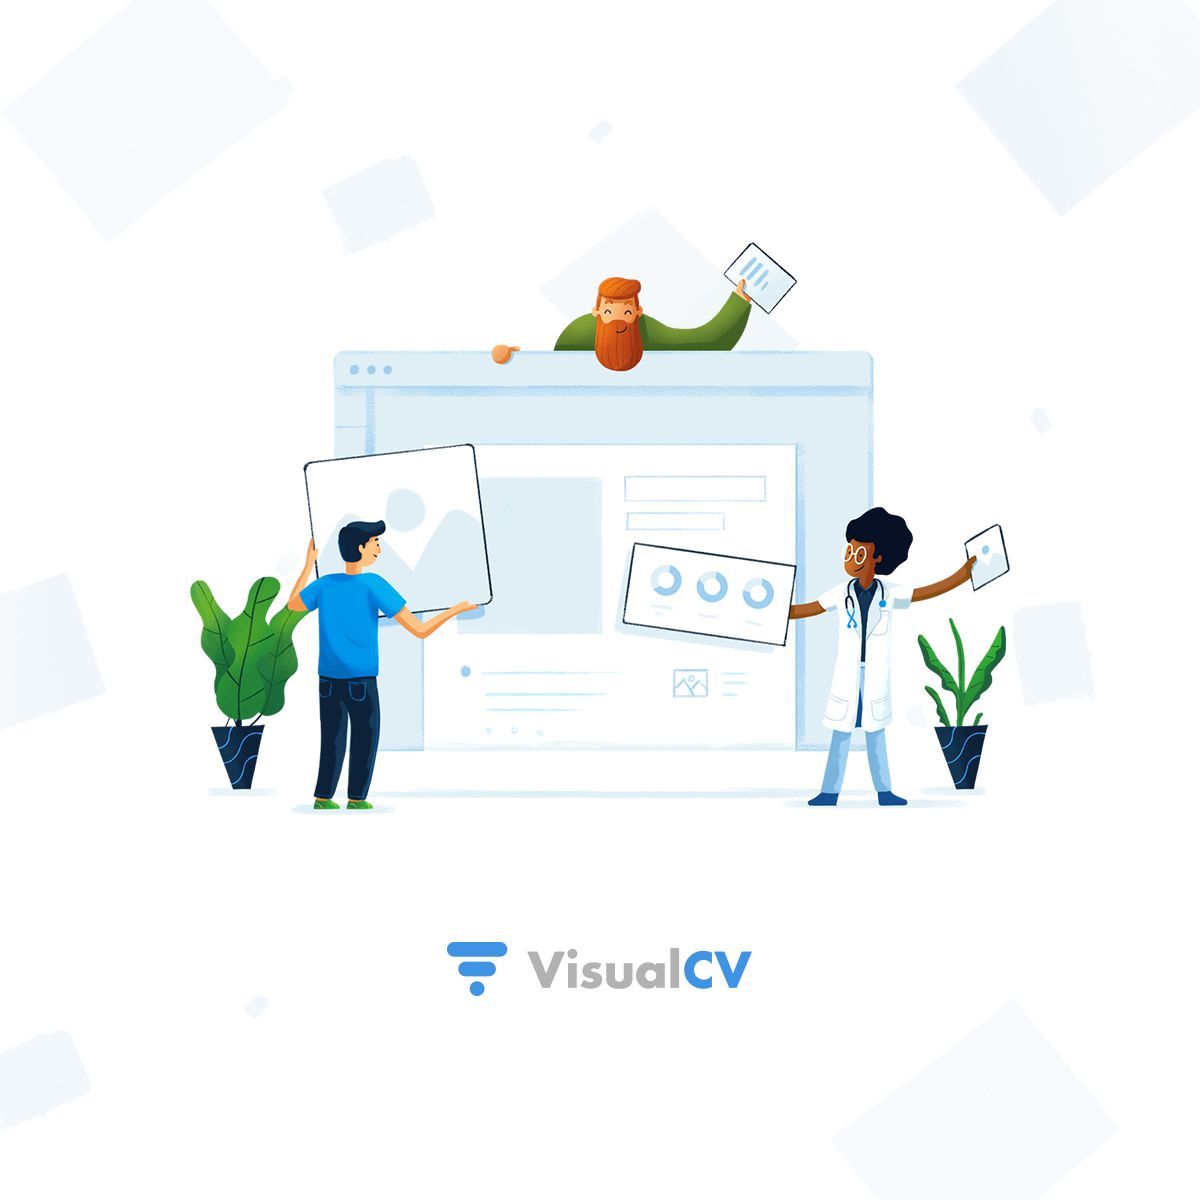 Track your resume's performance with VisualCV's CV analytics. #CVAnalytics #TrackPerformance #resume #jobsearch #job #jobs #career #hiring #employment #resumetips #recruitment Sign Up! buff.ly/3VGrL43